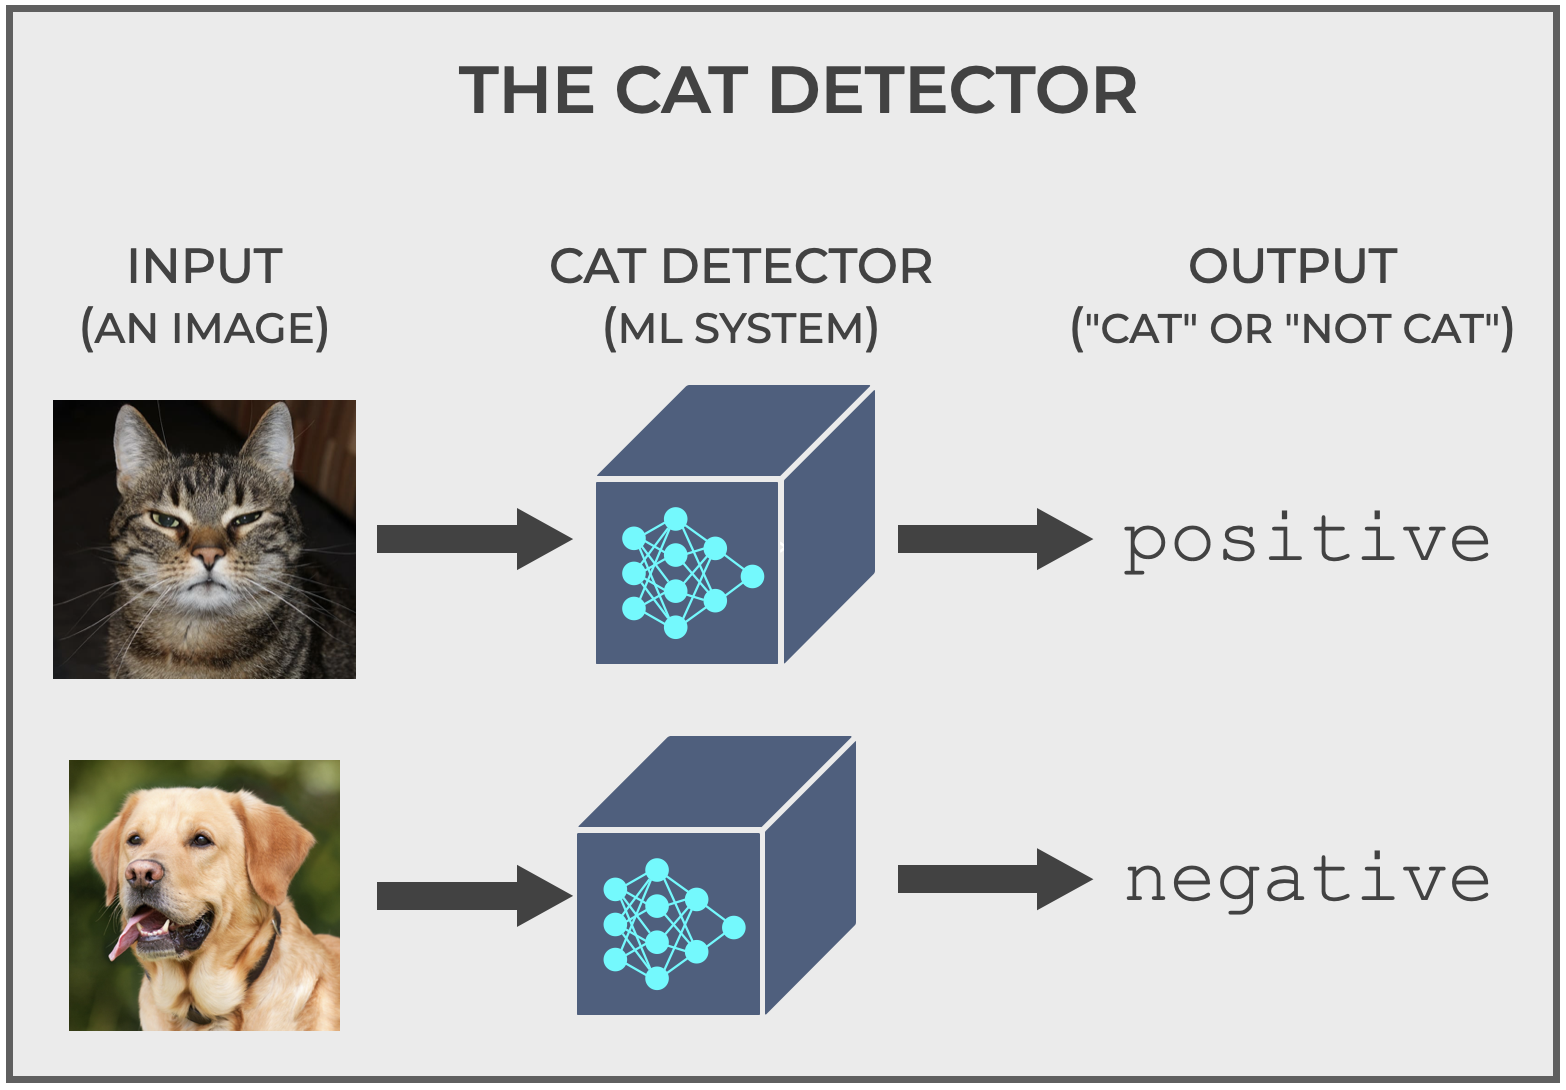 An image that shows how the Cat Detector classification system classifies images into cat or non-cat (i.e.. positive and negative classes).